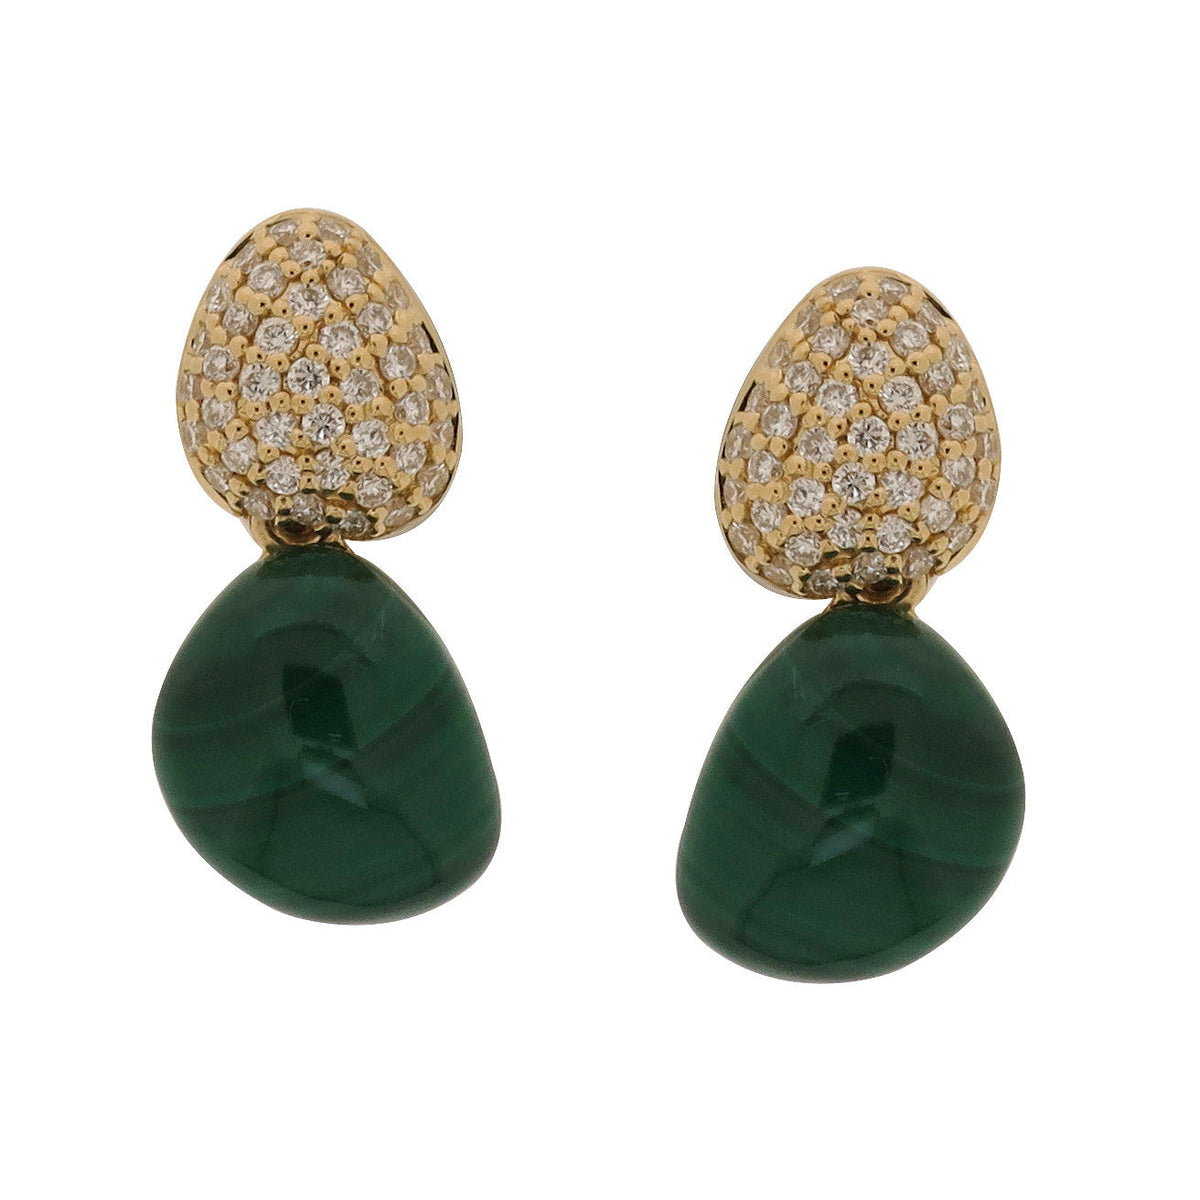 Oval Malachite & Diamond Earrings with 18K Yellow Gold. Carefully curated into the Modern Designs. 18K Yellow Gold: 2.77 grams Diamond: 0.392 ct Malachite: 8.36 ct Gold Post